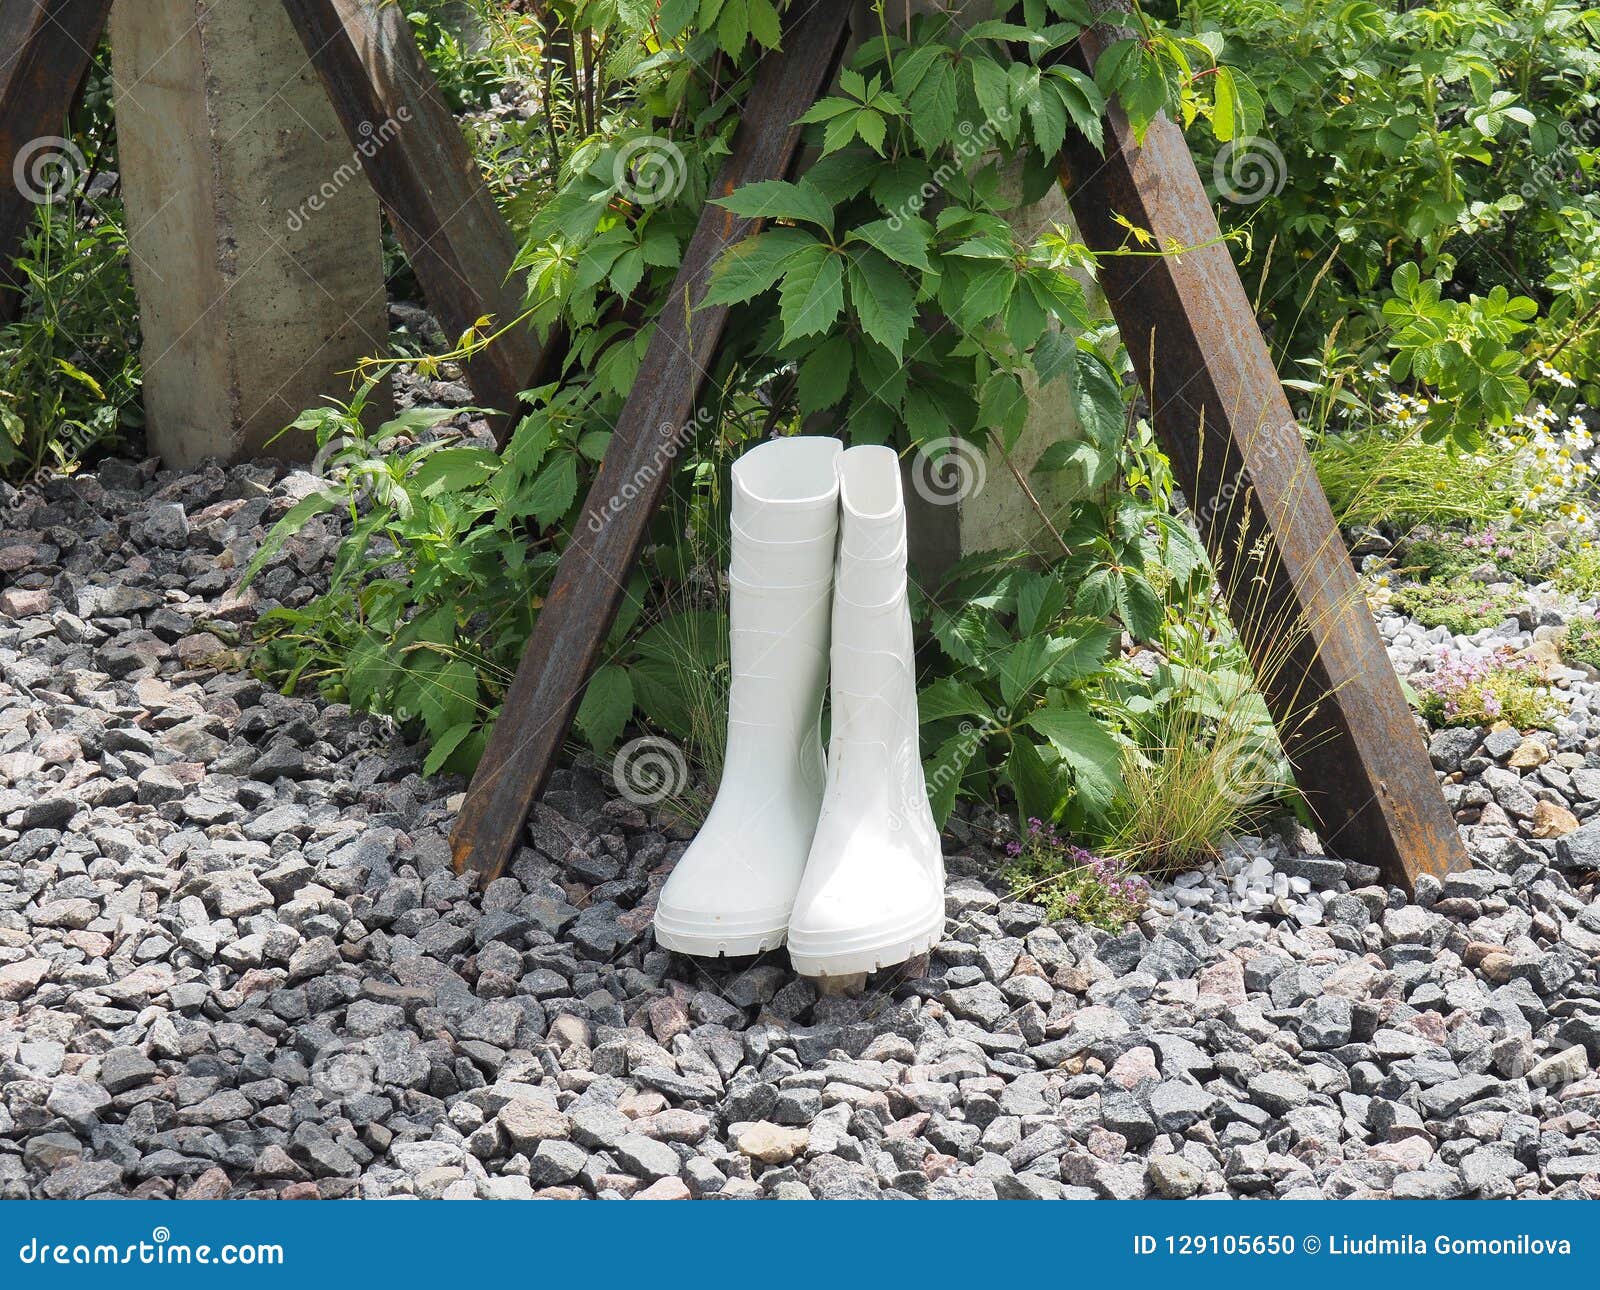 White Rubber Boots On The Rocks In The Garden Stock Photo Image